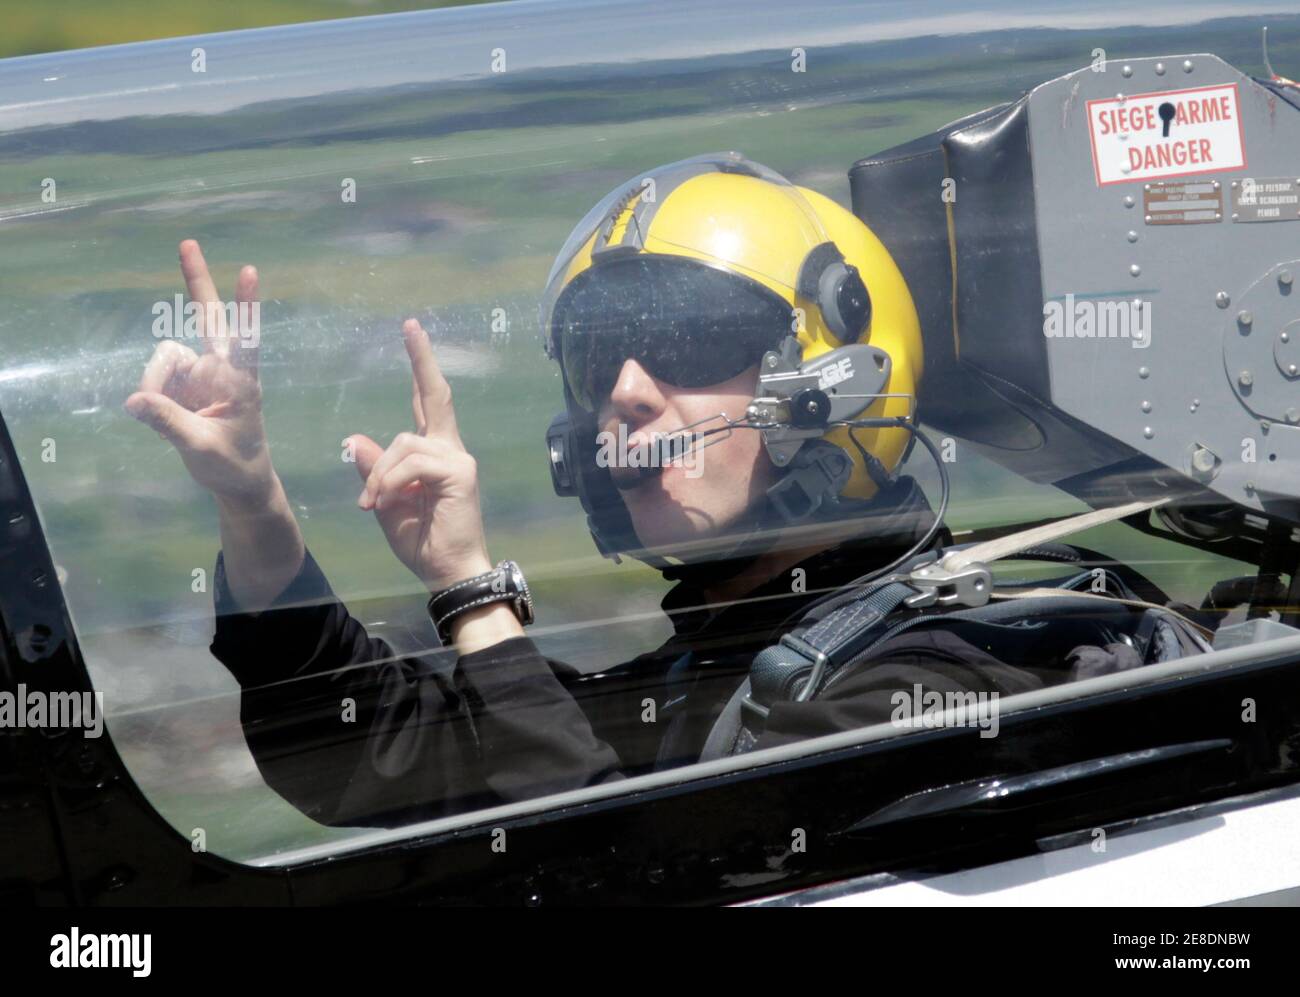 Four time Olympic ski jump winner Simon Ammann of Switzerland waves before  his flight with the Breitling Jet Team in Buochs May 11, 2010. Ammann has  become the ambassador of the Breitling